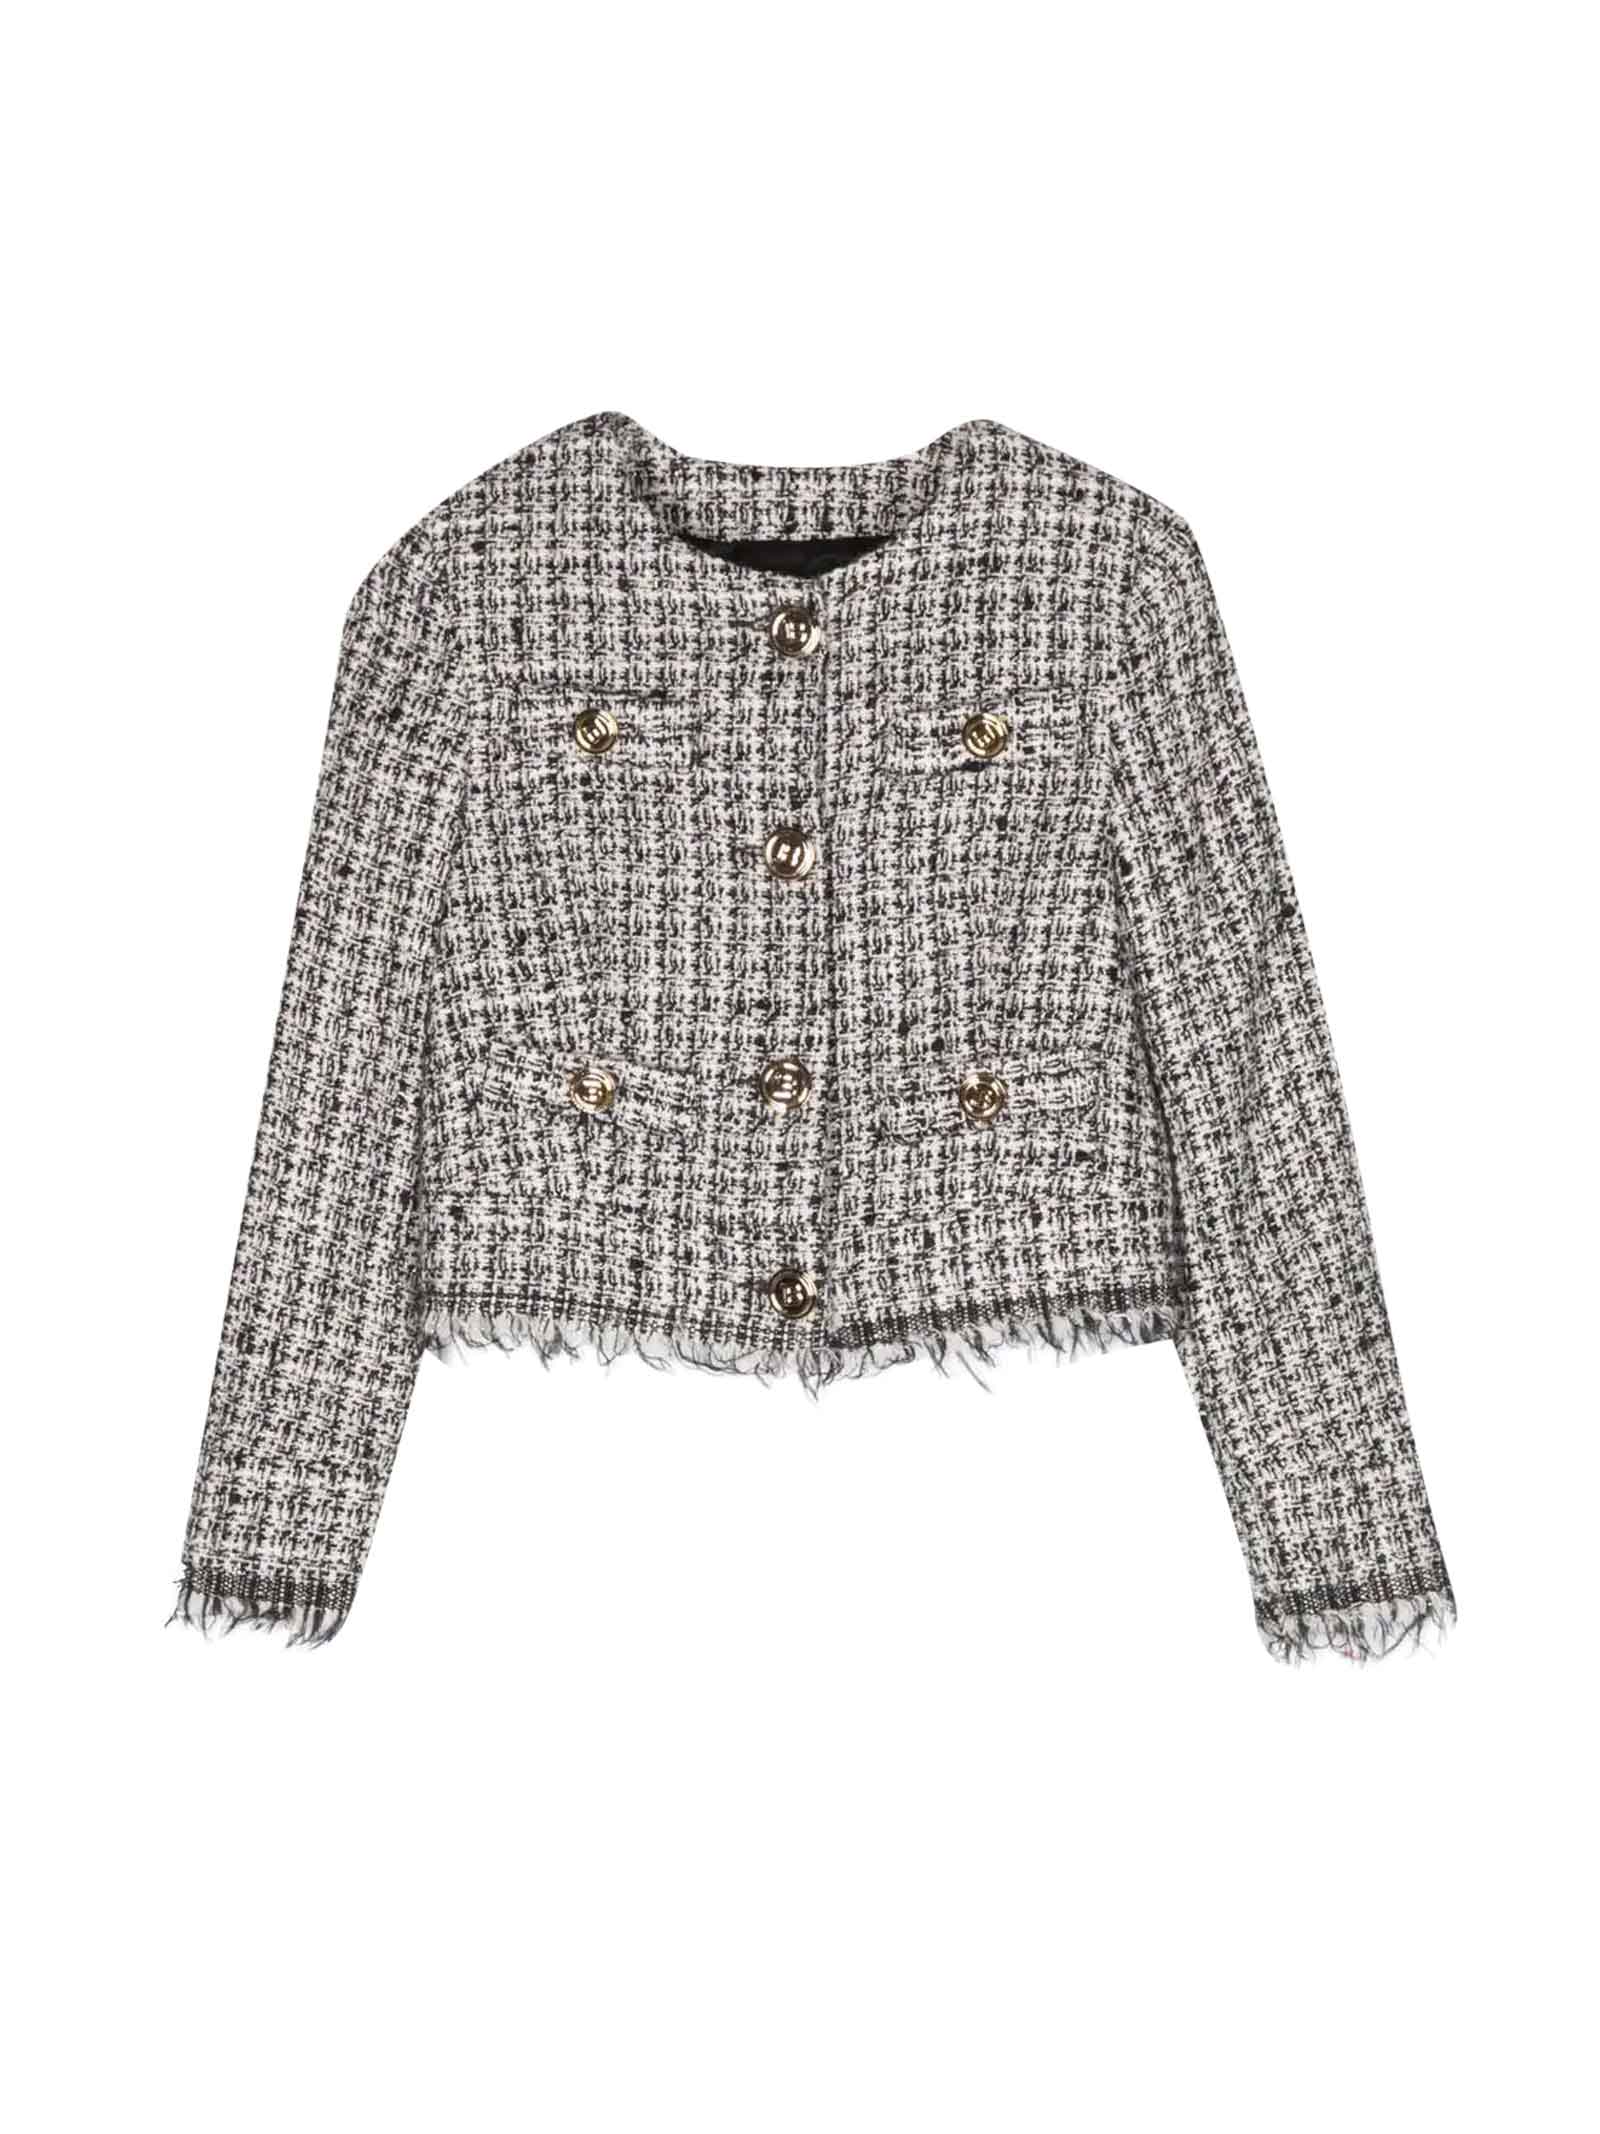 GAÂLA Paris Black Jacket Harmony | Tweed Button-Down Jacket Crafted from Breathable Upcycled Cotton | Ideal for Formal Occasions | Elegant Stylish & Classic